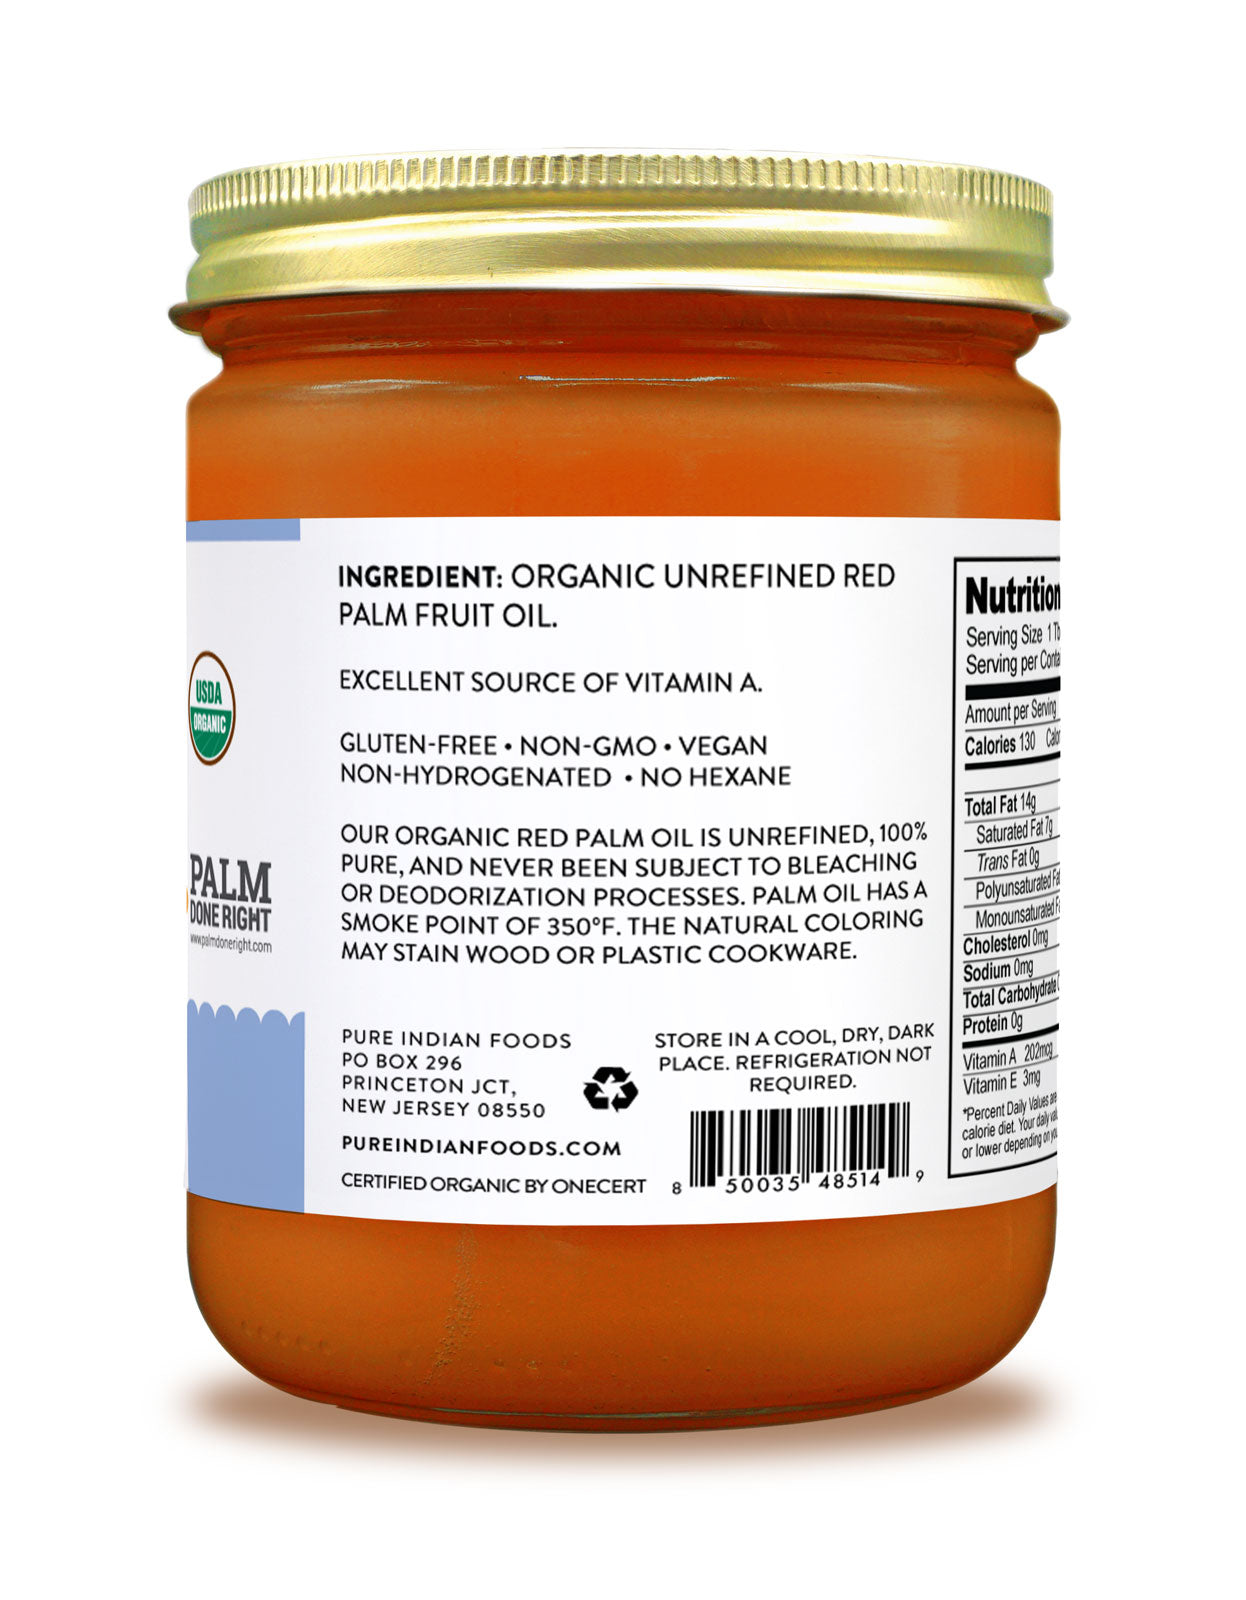 Ingredient label on a jar of organic palm oil from Pure Indian Foods